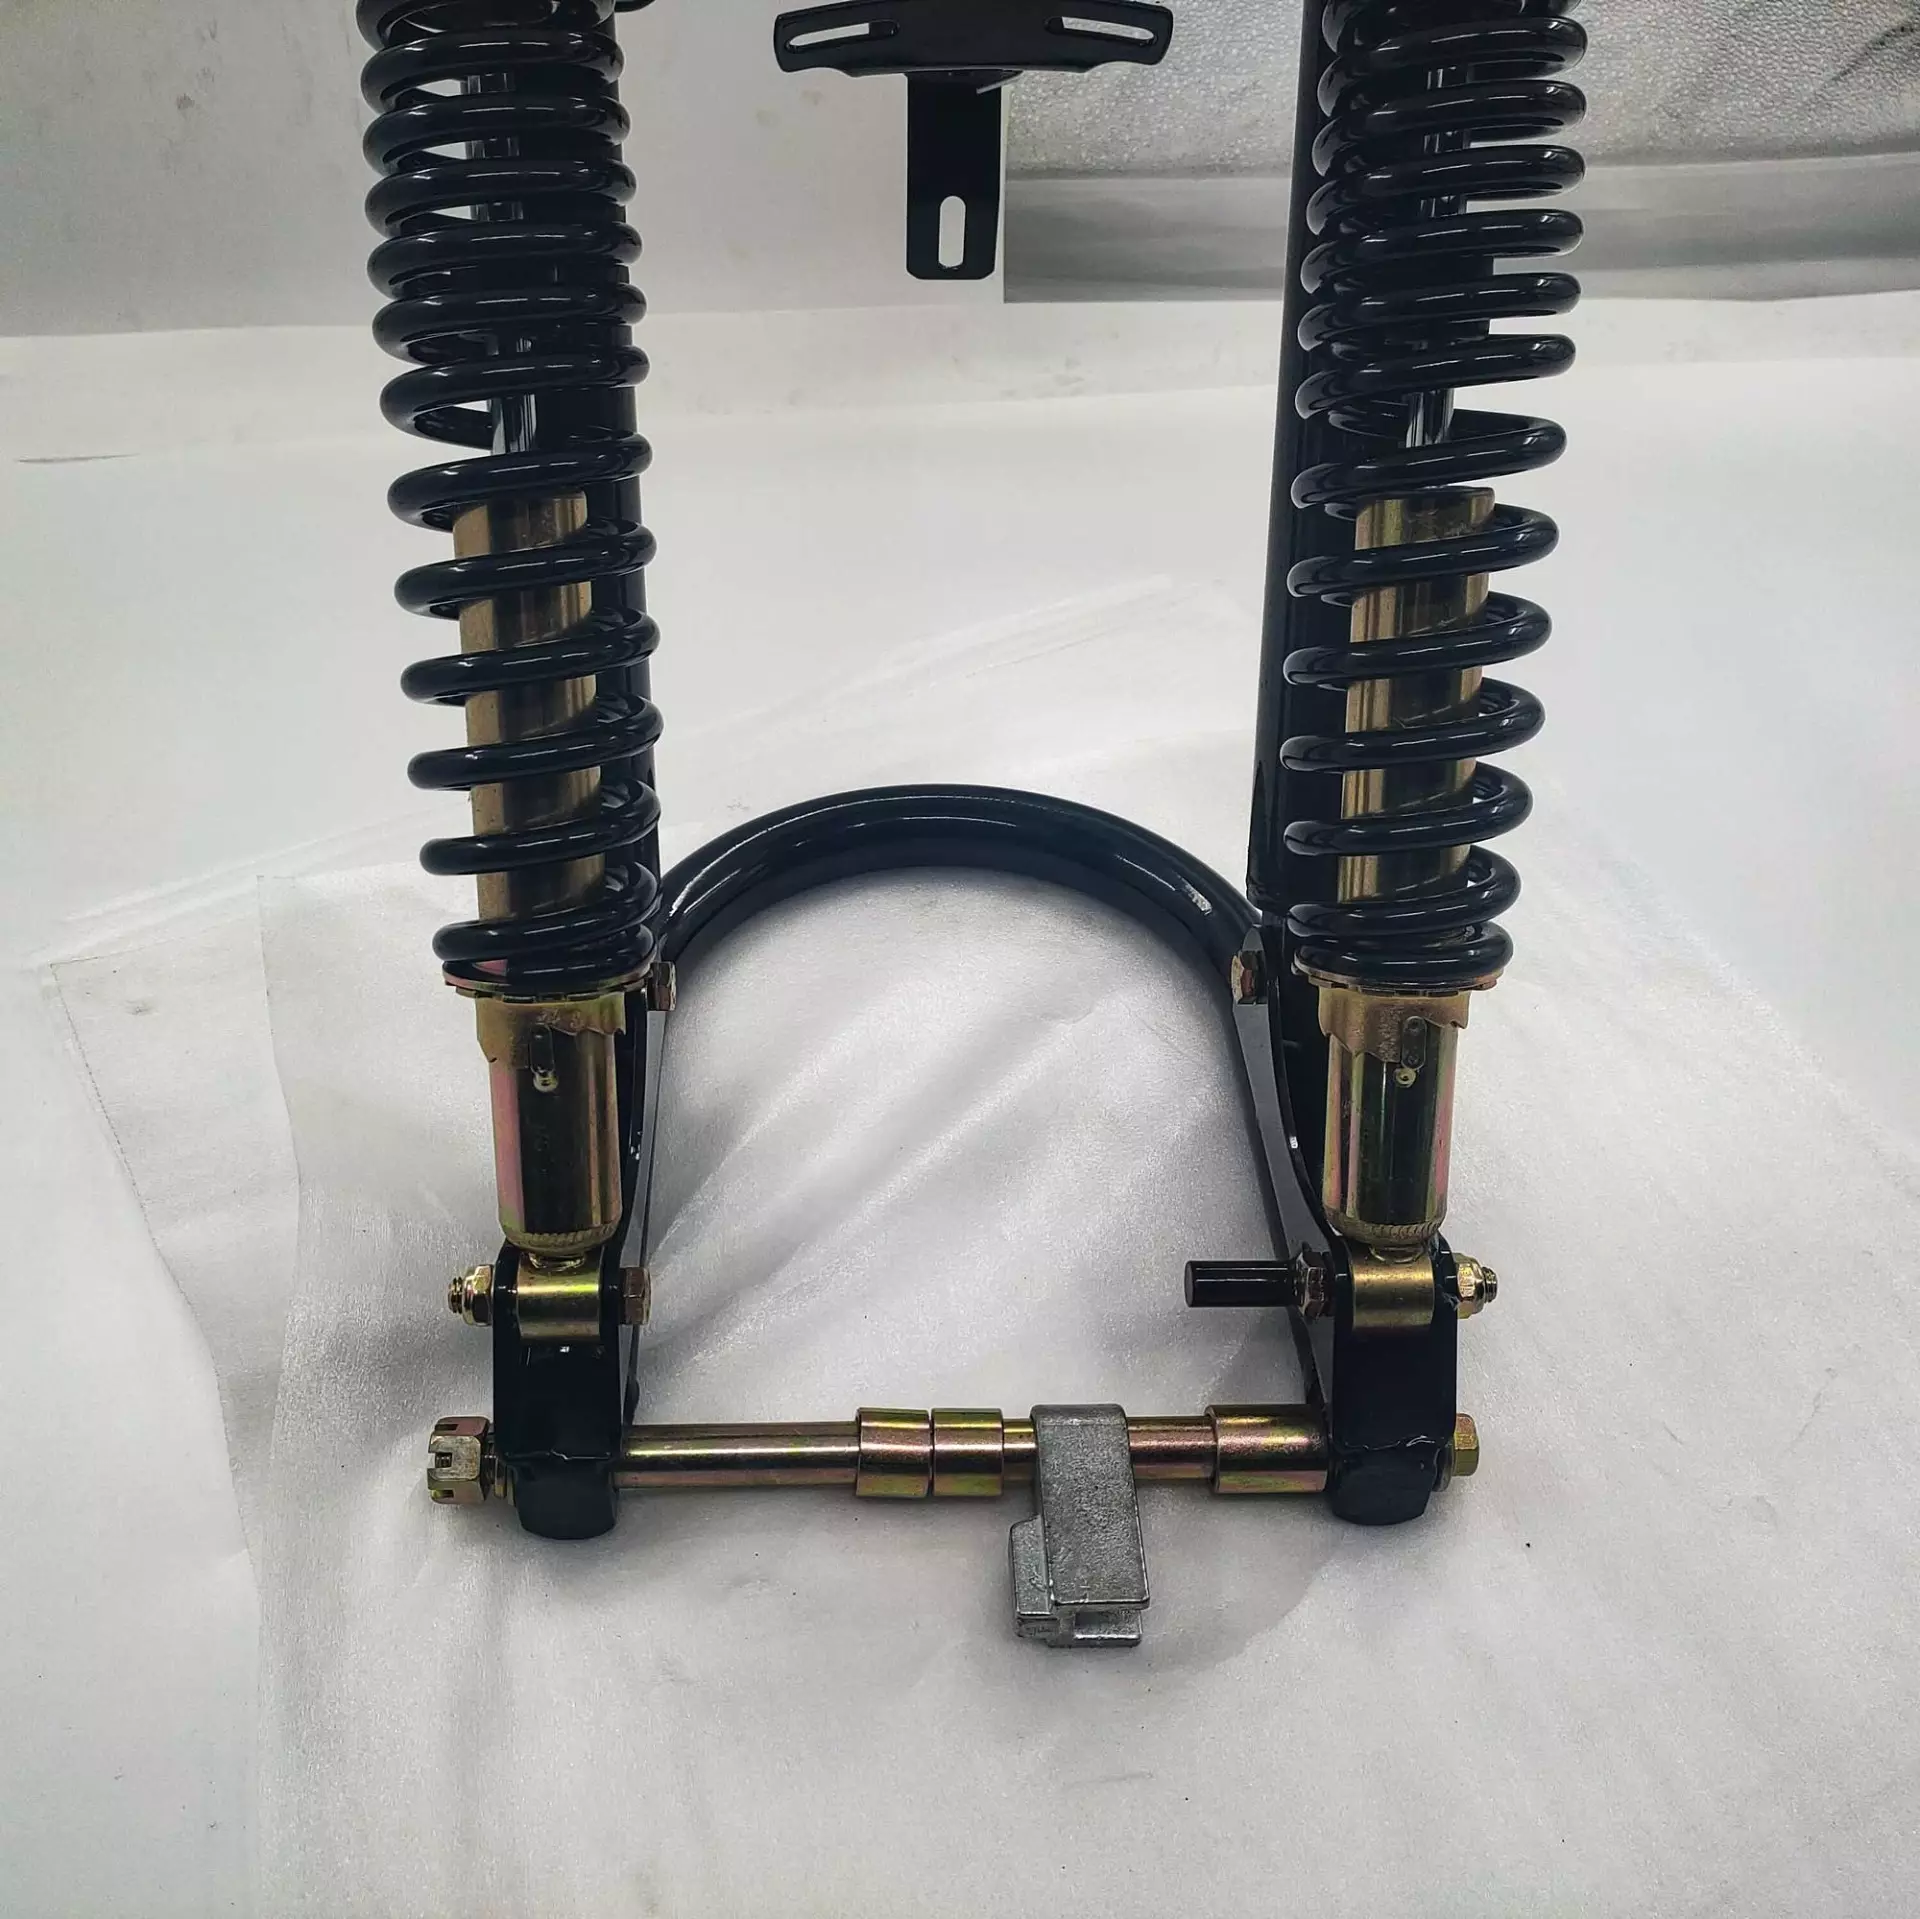 DAYANG factory direct sale tricycle parts motorcycle controller  hight quality 270 cradle shock absorption made in China